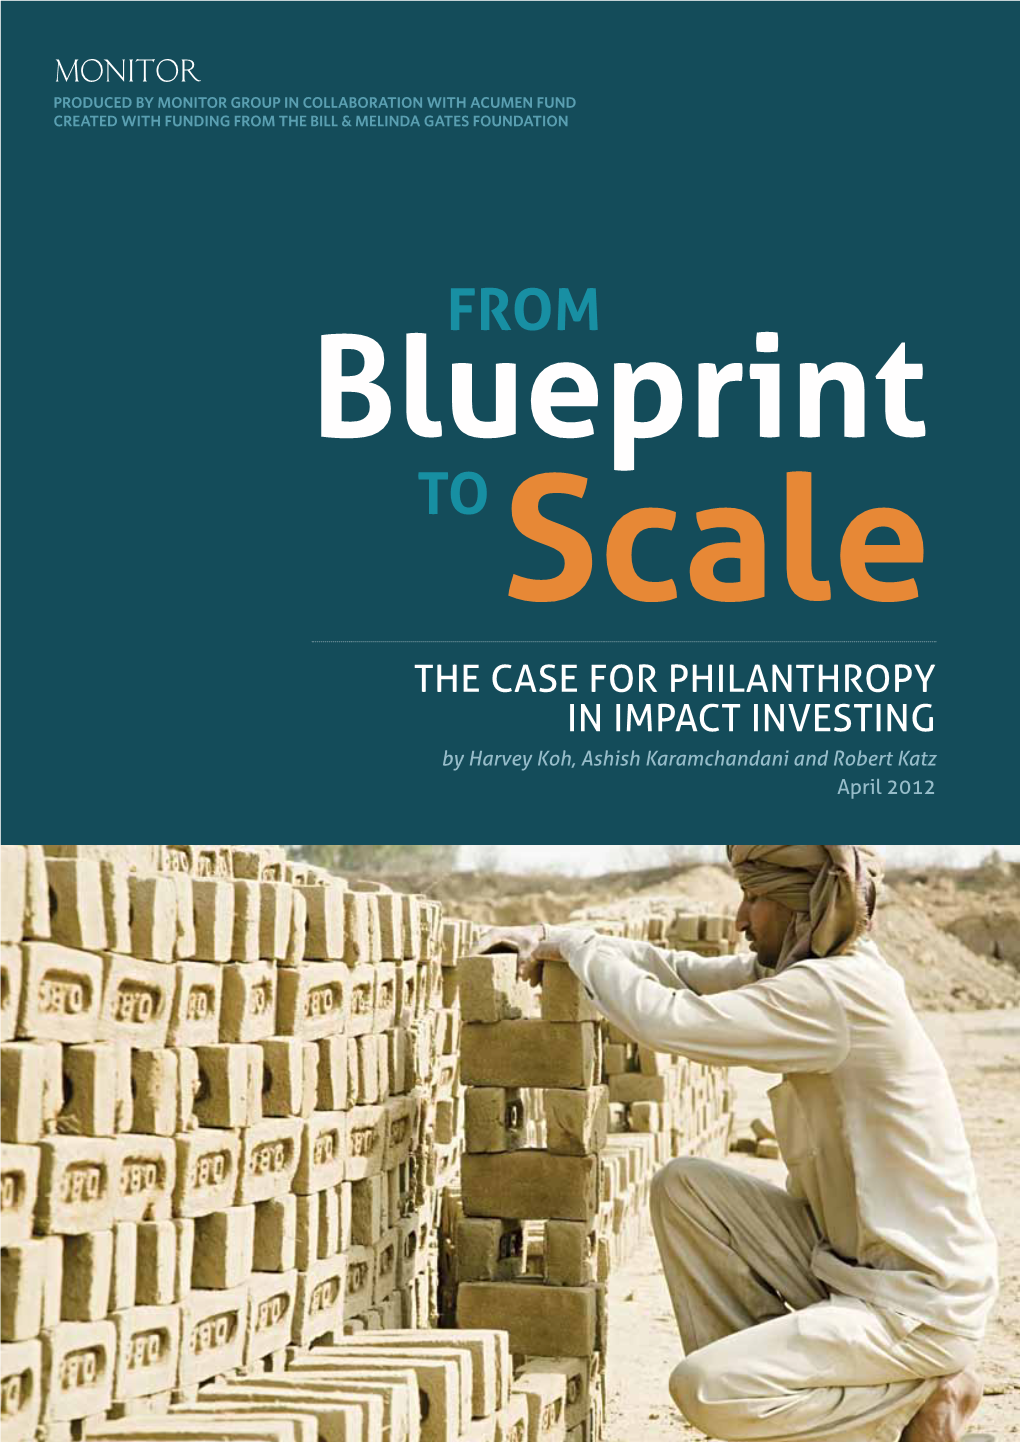 From Blueprint to Scale: the Case for Philanthropy in Impact Investing